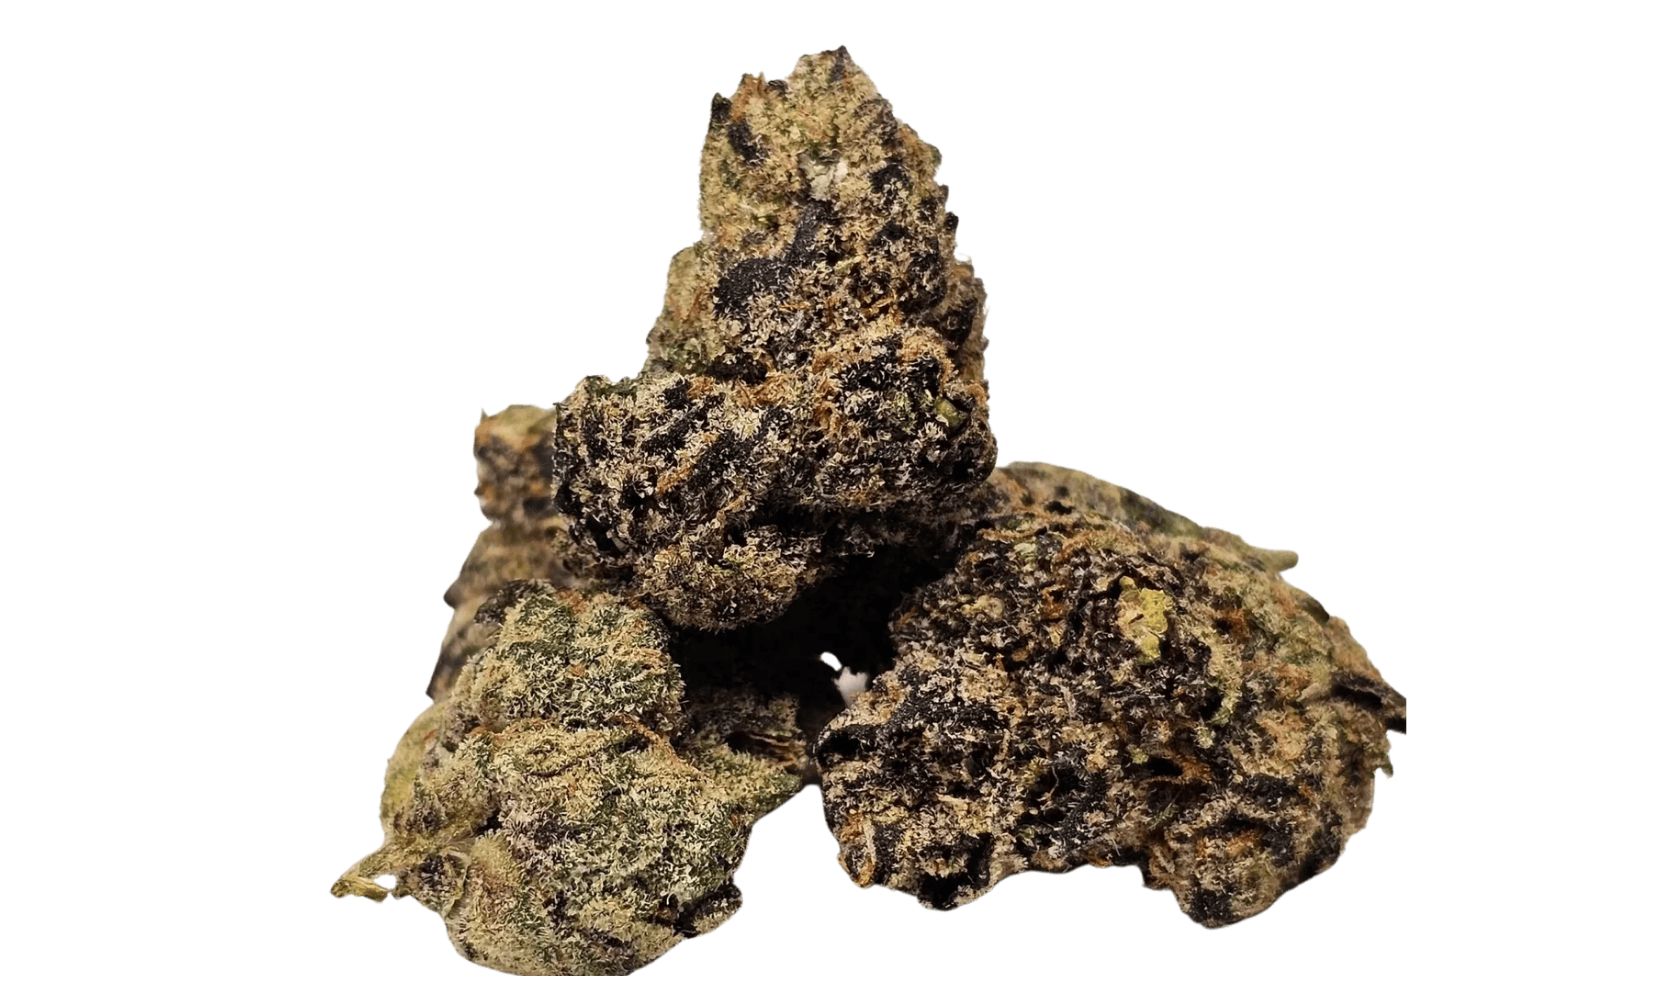 The Gelato 33 strain is one of the most popular cannabis buds among enthusiasts in Canada.